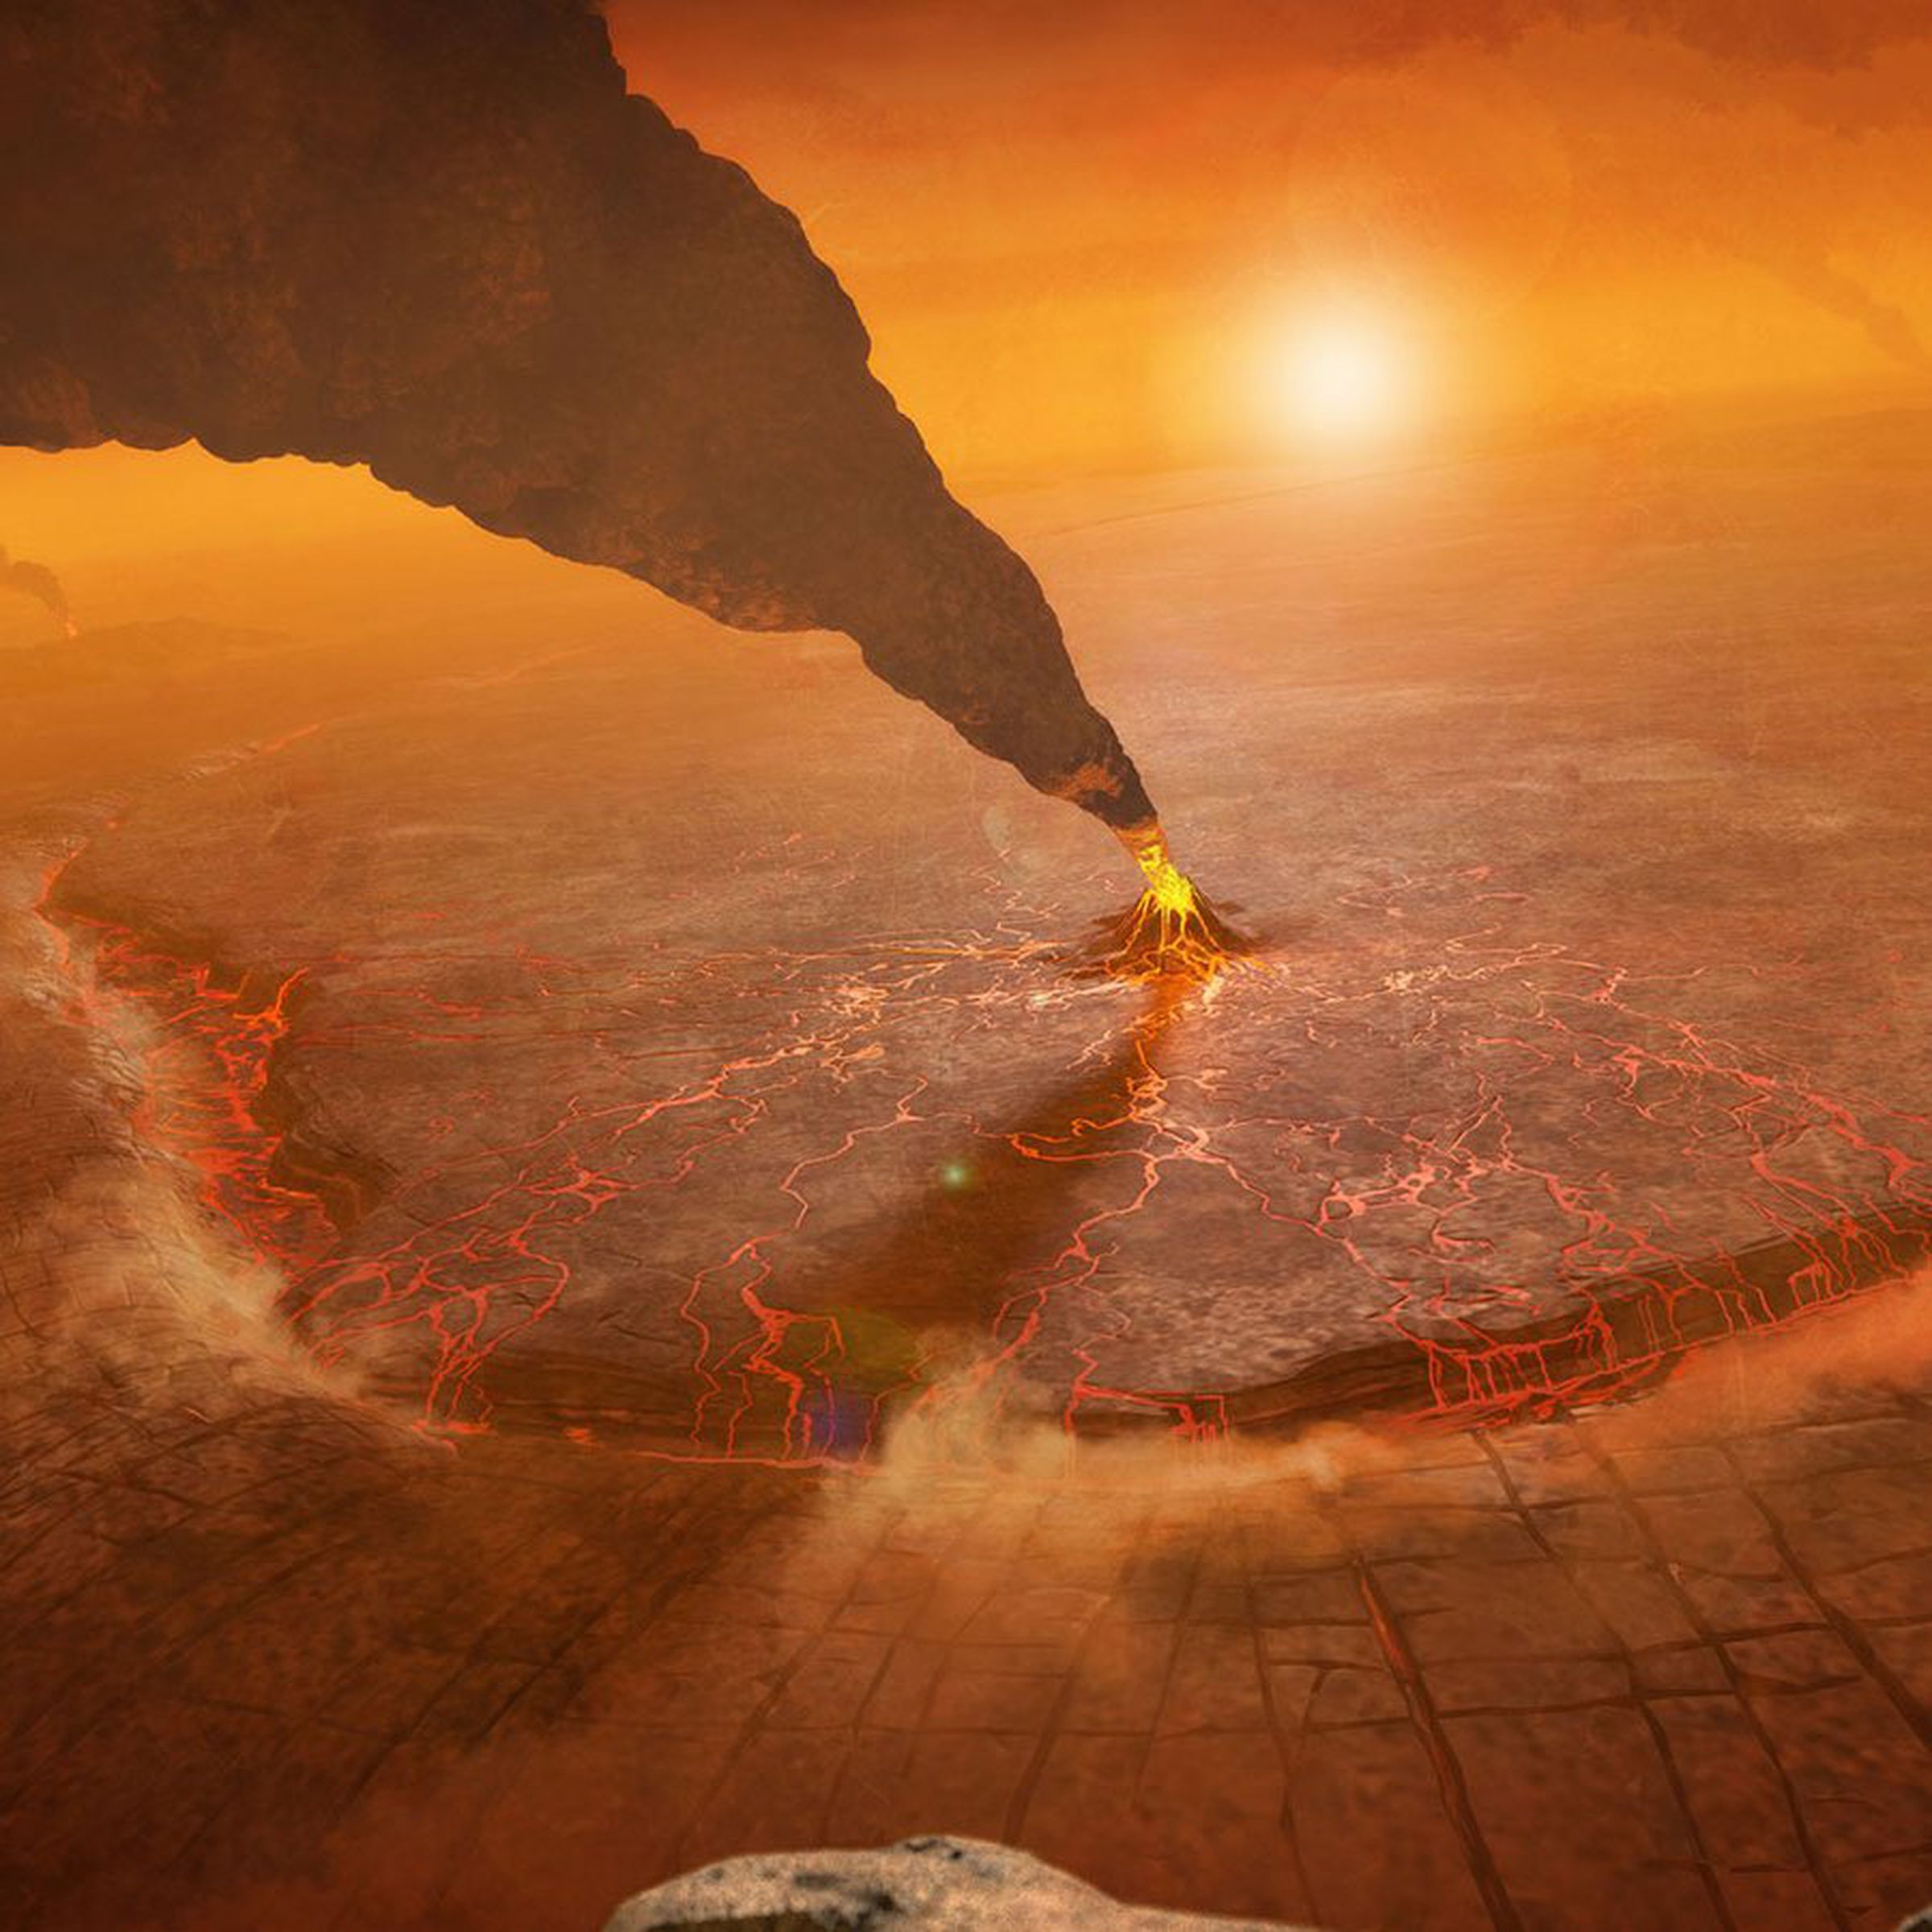 This artist’s conception illustrates a region of Venus that may have active volcanism and subduction, where the surface is sinking into the mantle.